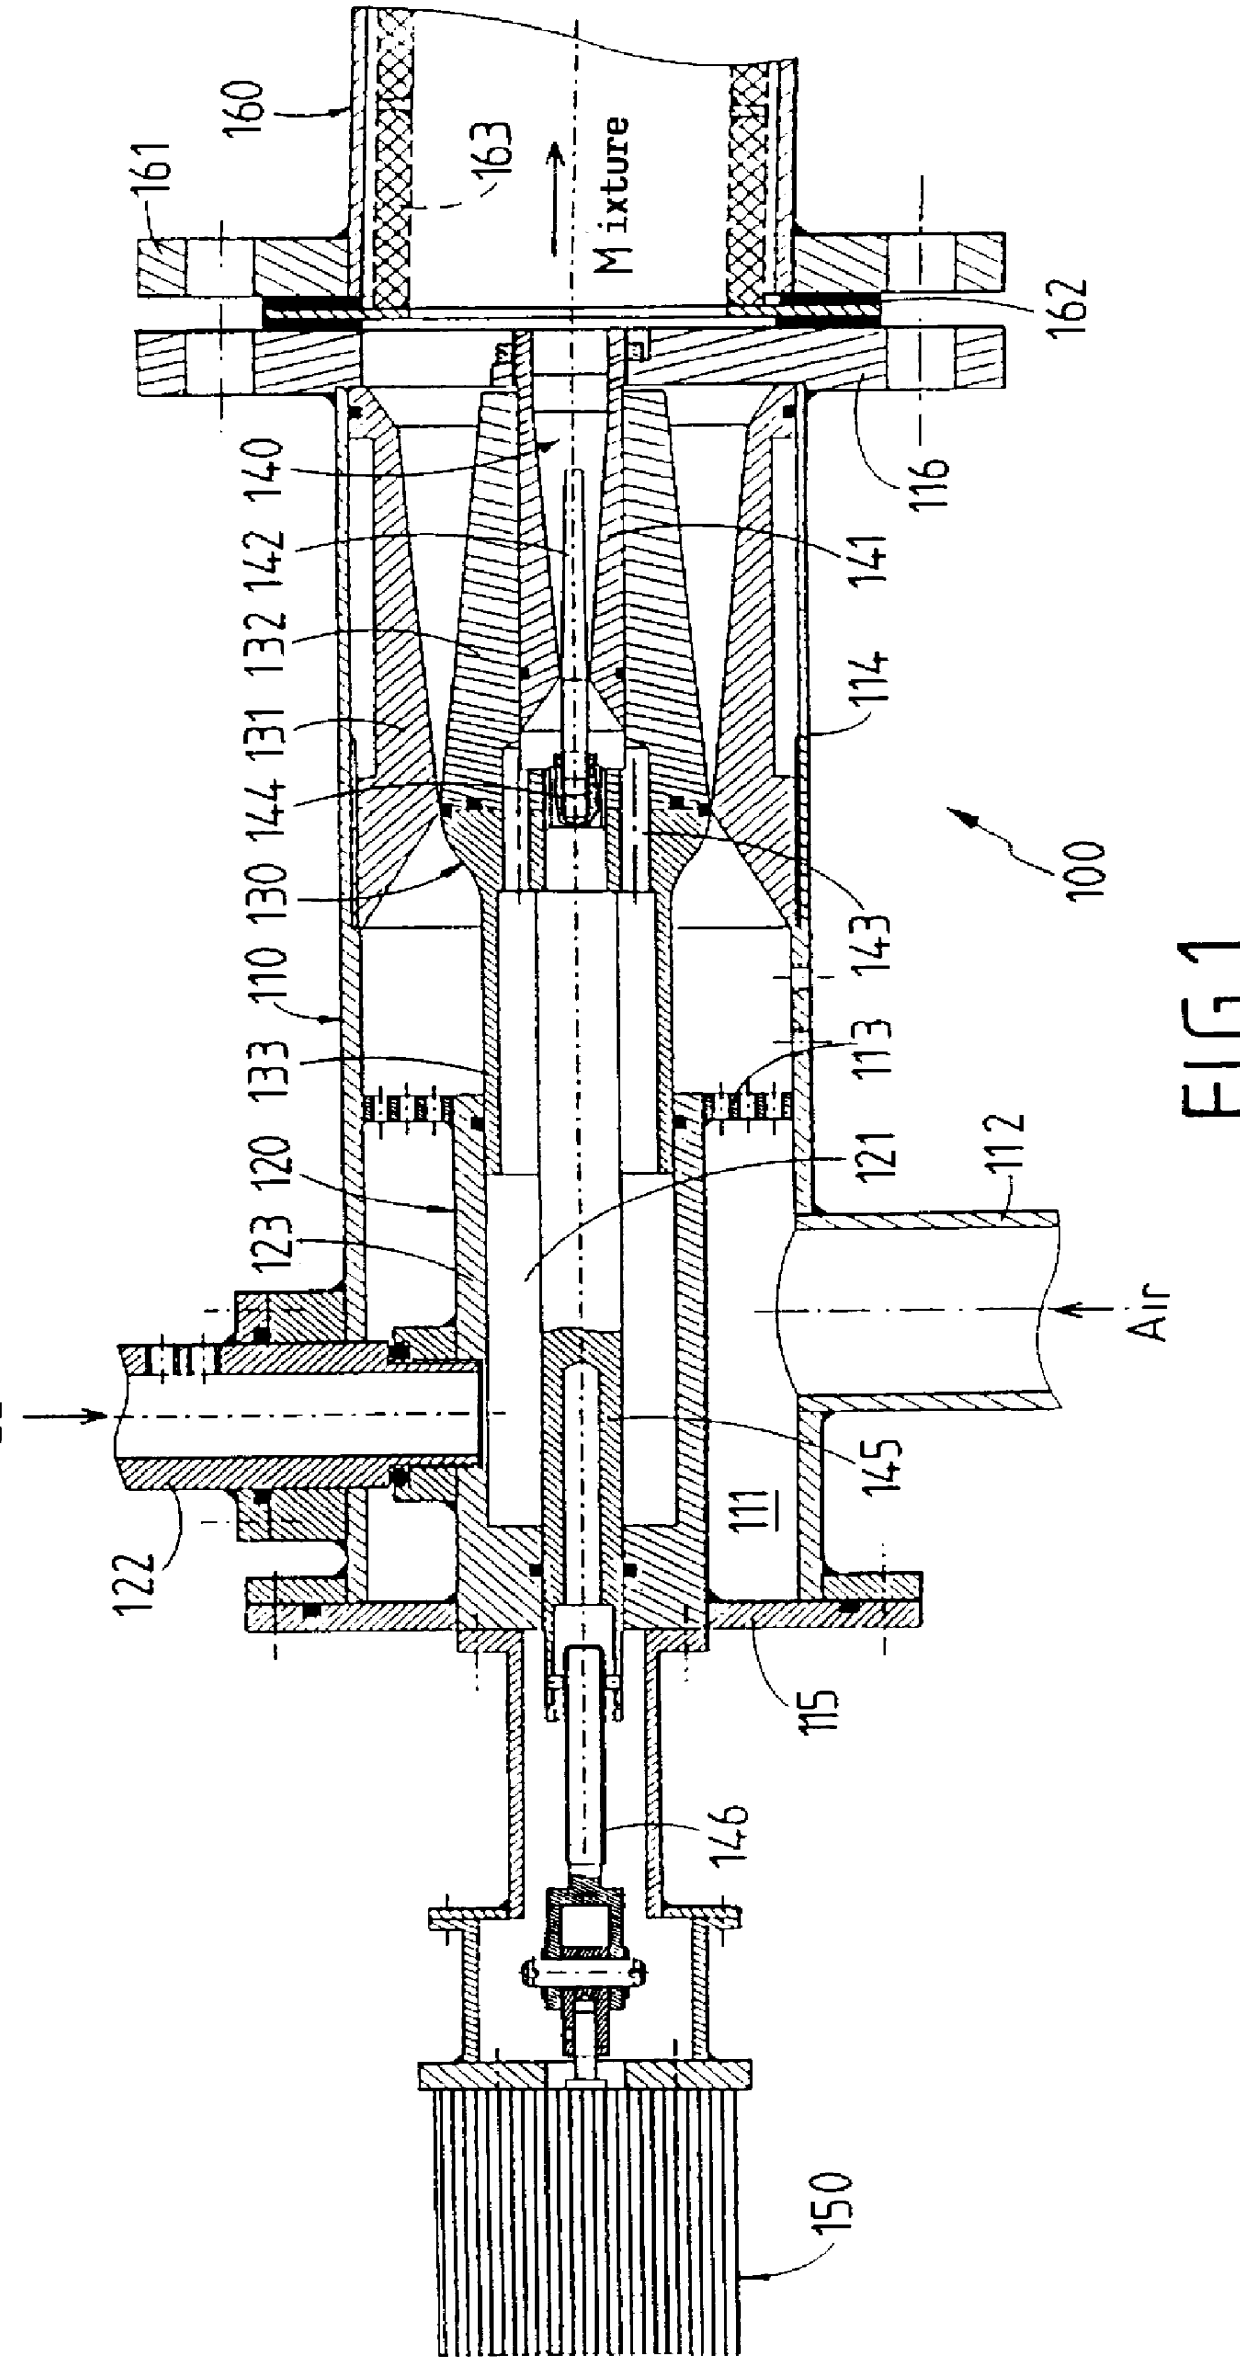 Universal mixer device for mixing two gaseous fluids